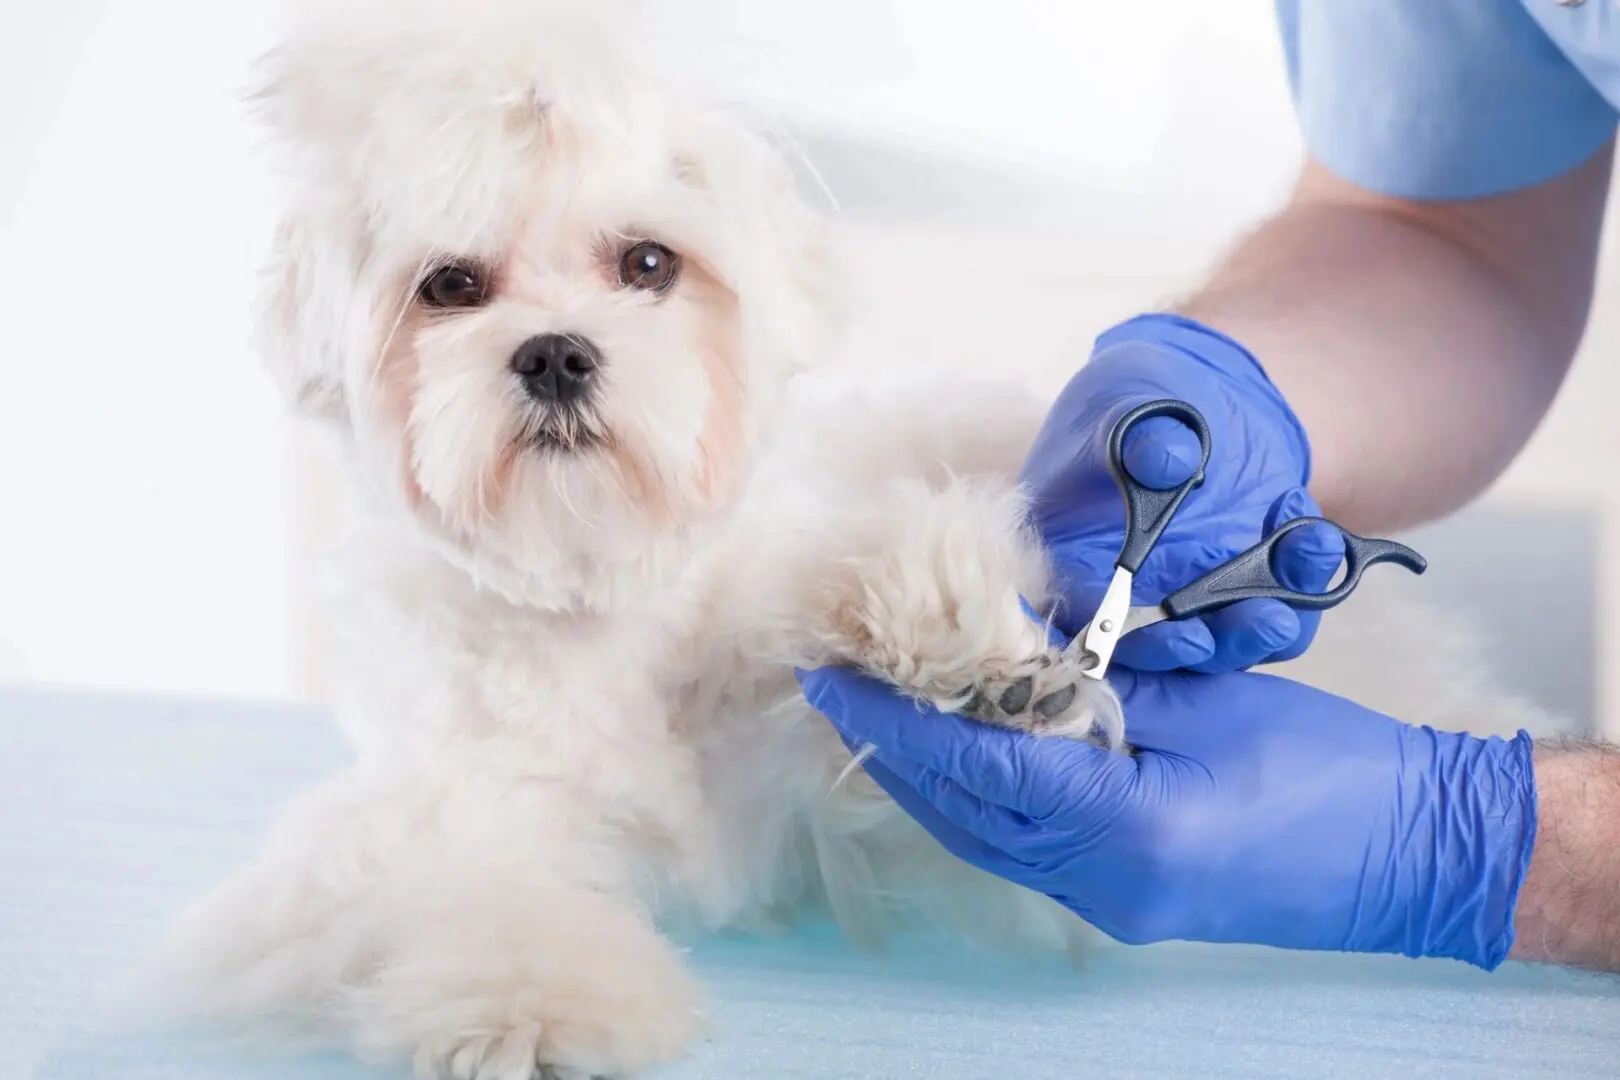 A white dog being groomed by someone in blue gloves.